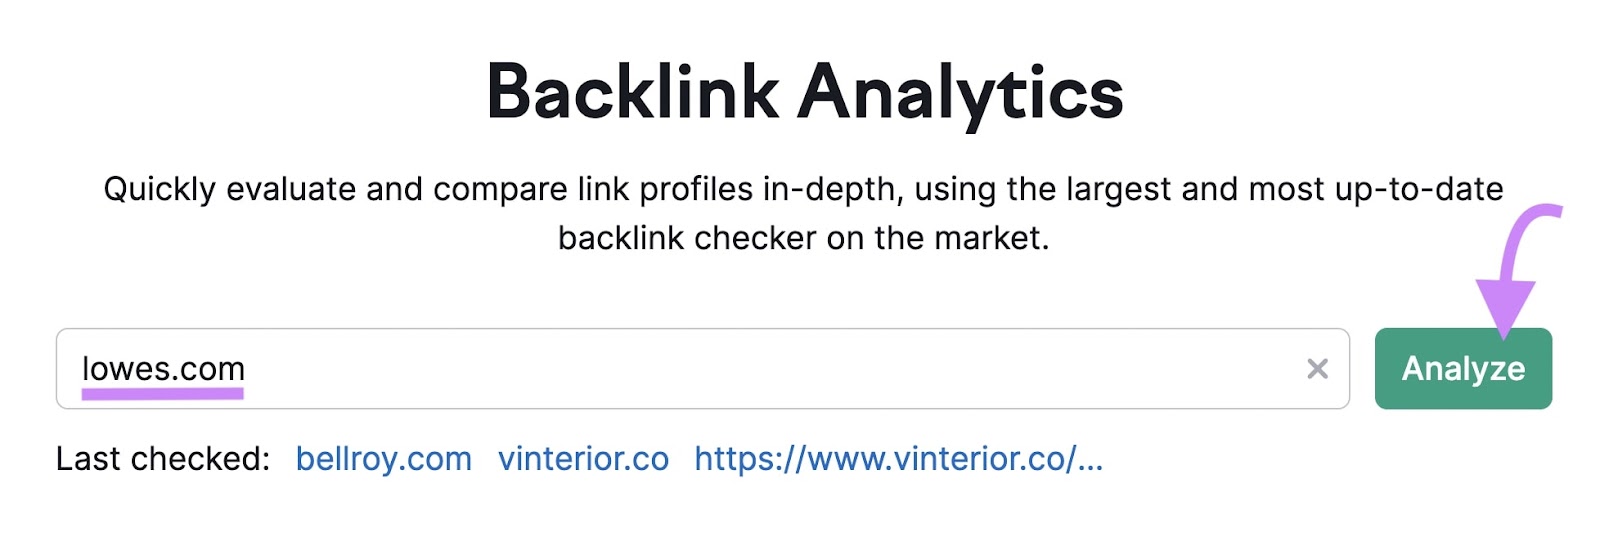 "lowes.com" entered into the Backlink Analytics tool search bar